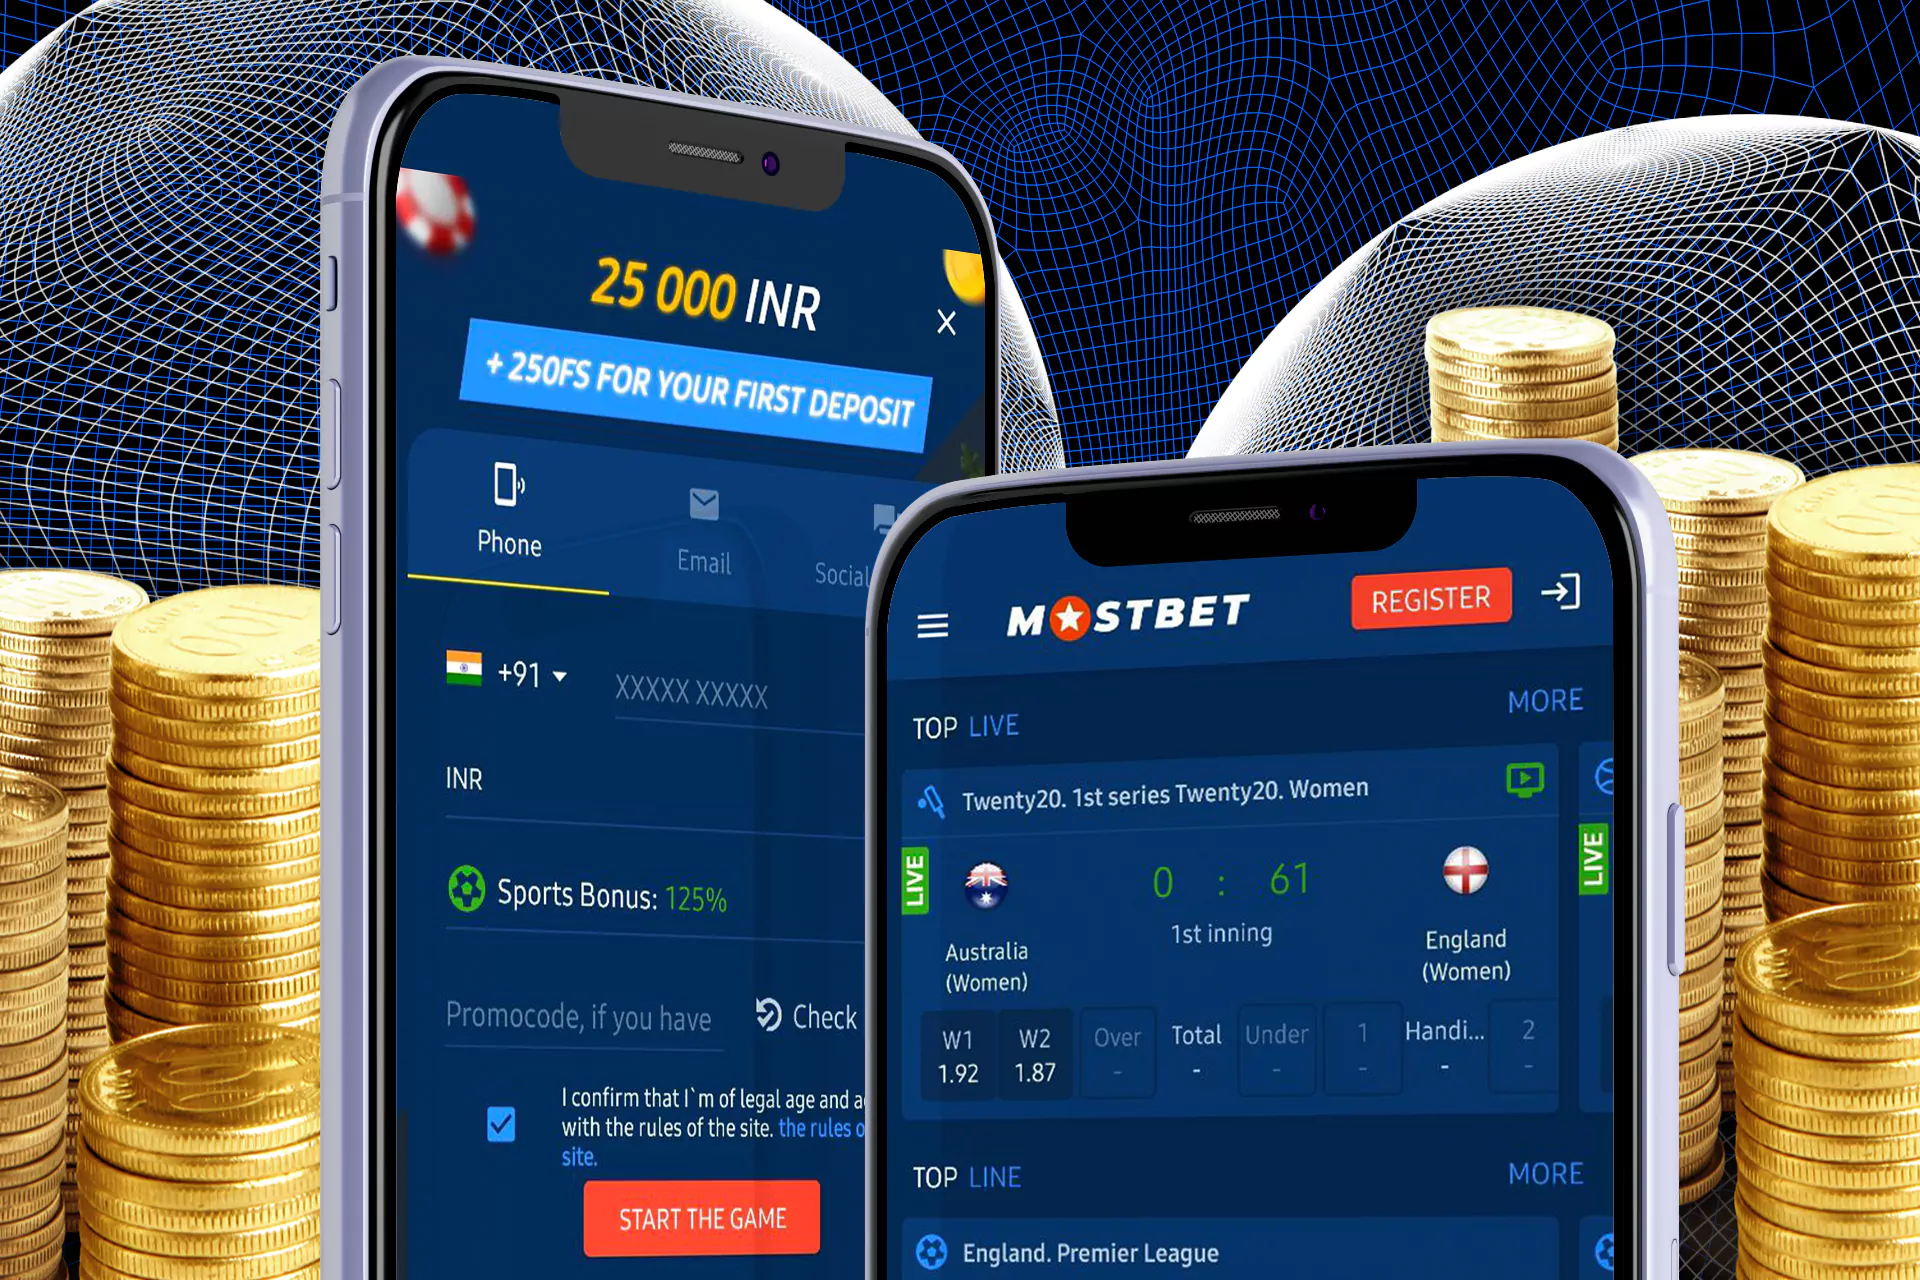 We tell you how to bet on sports through the app.